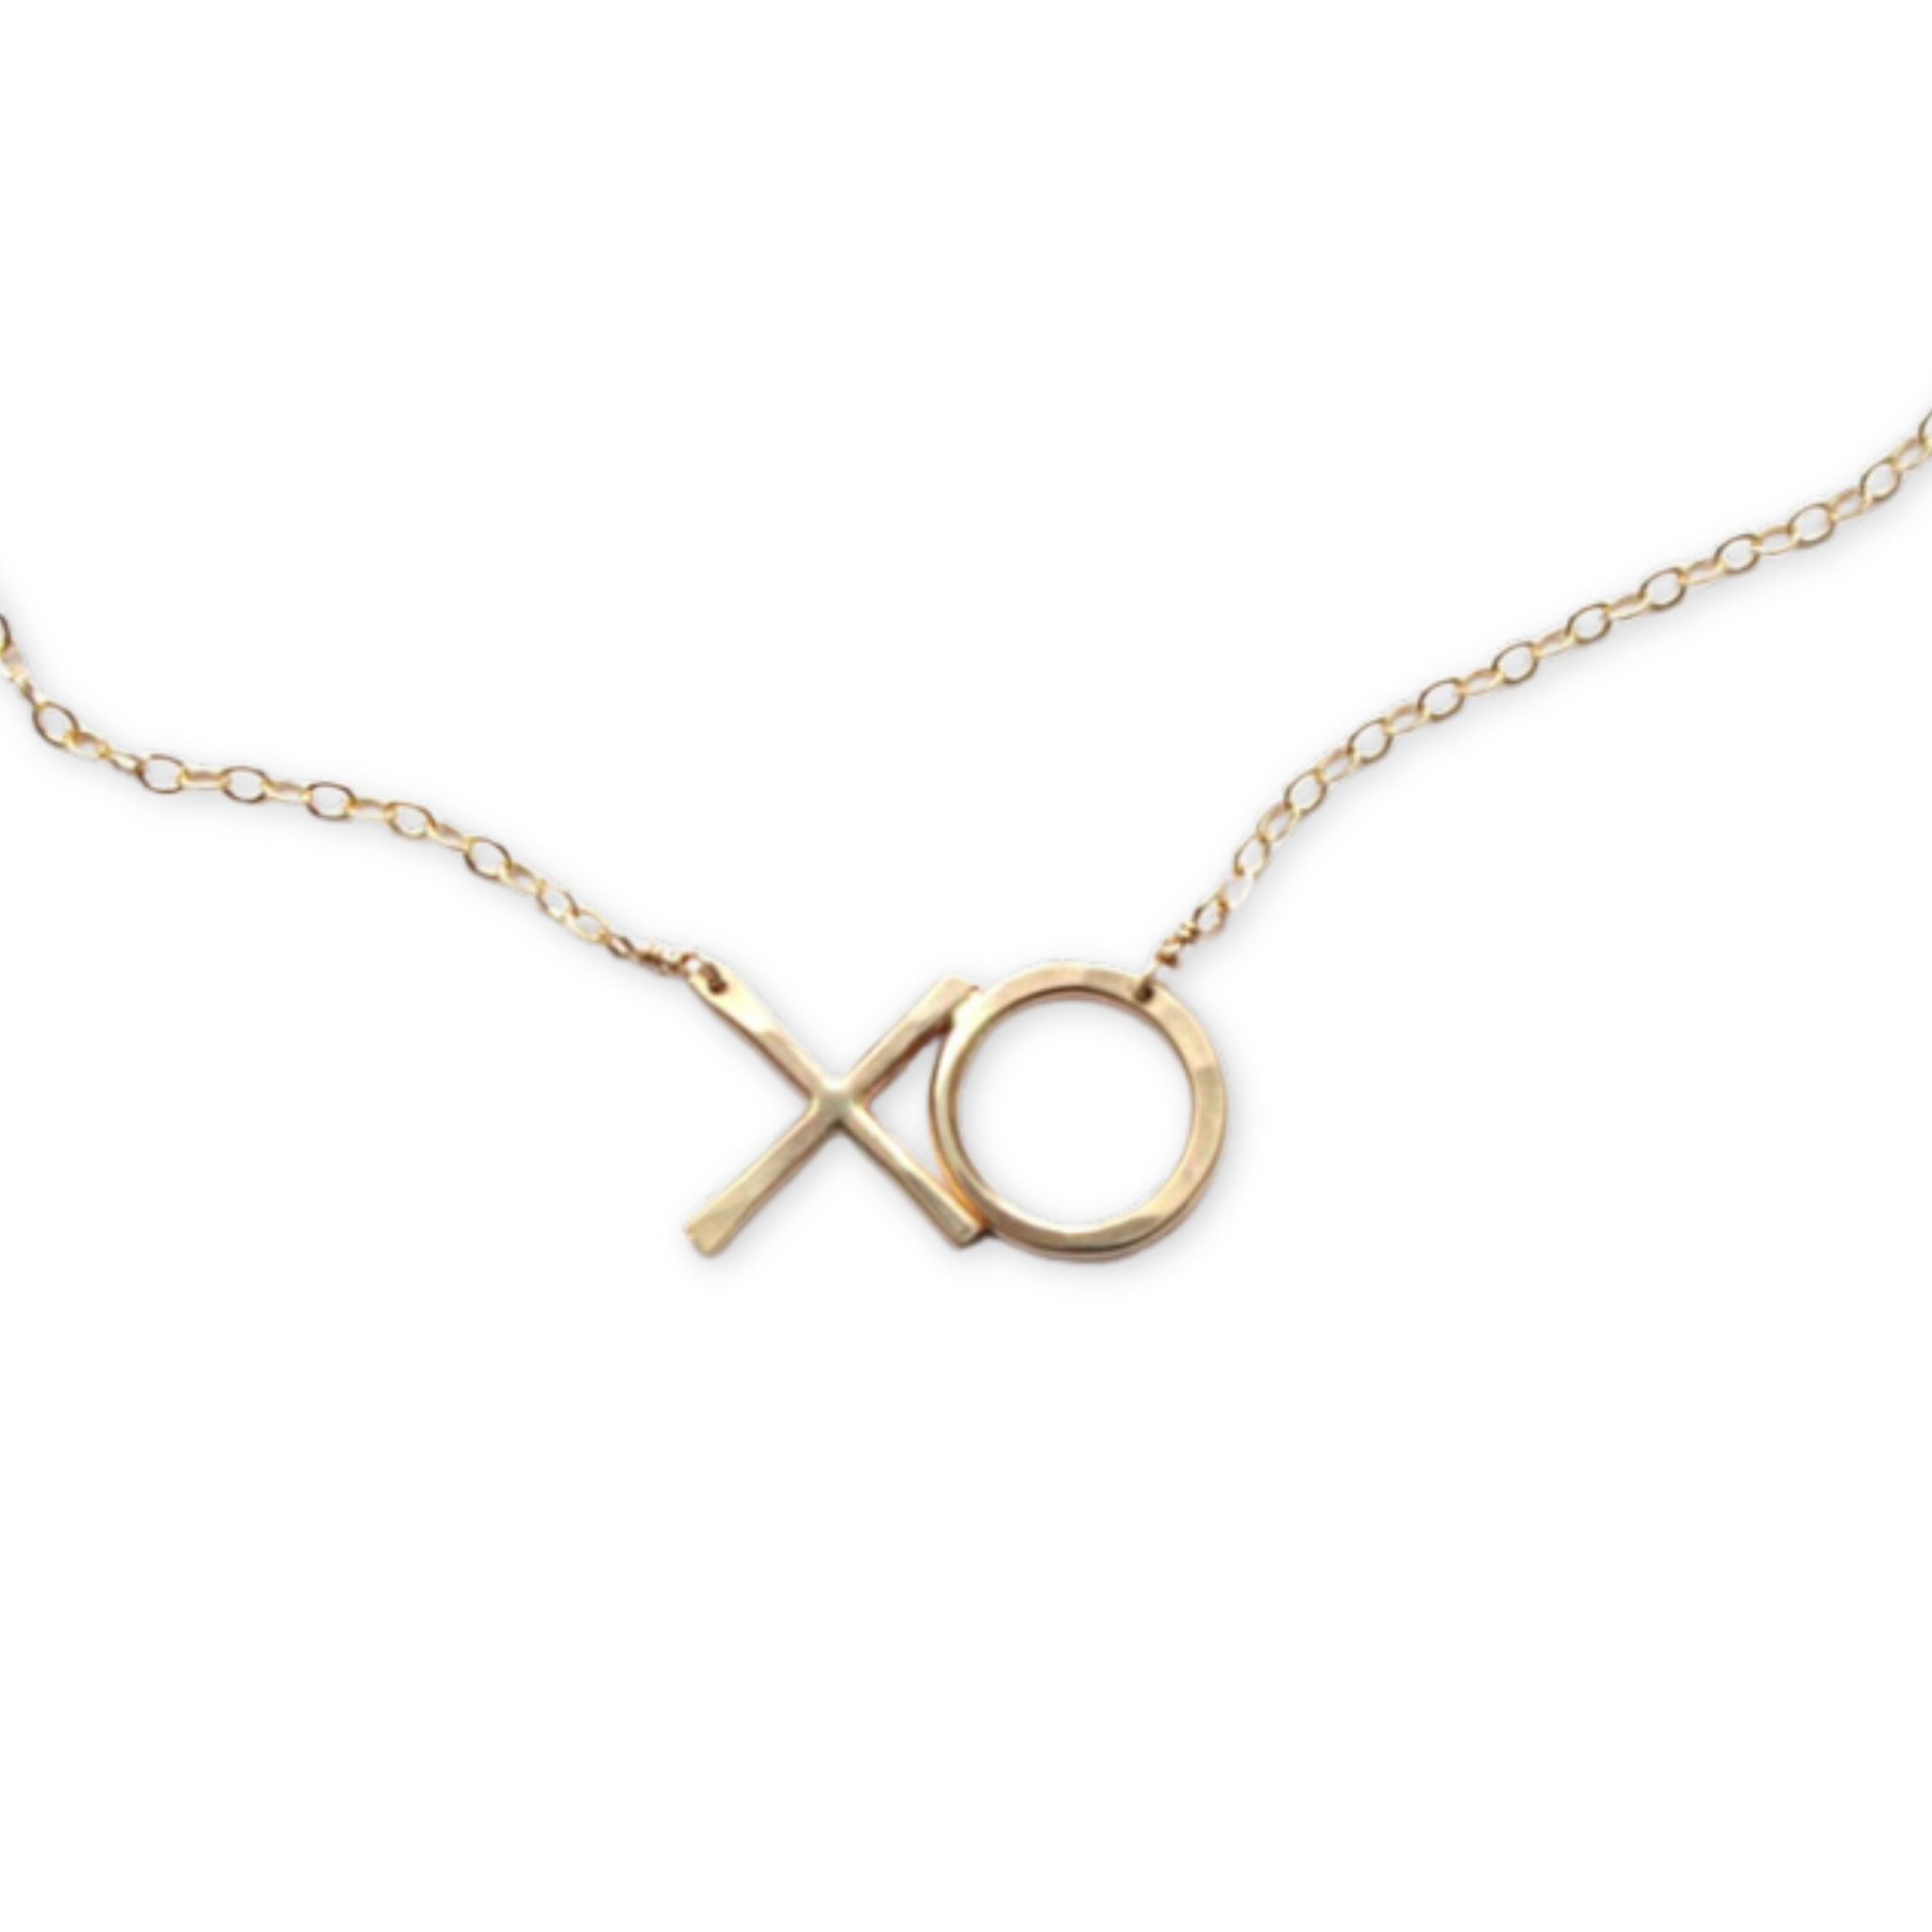 necklace with letters x and o pendant 